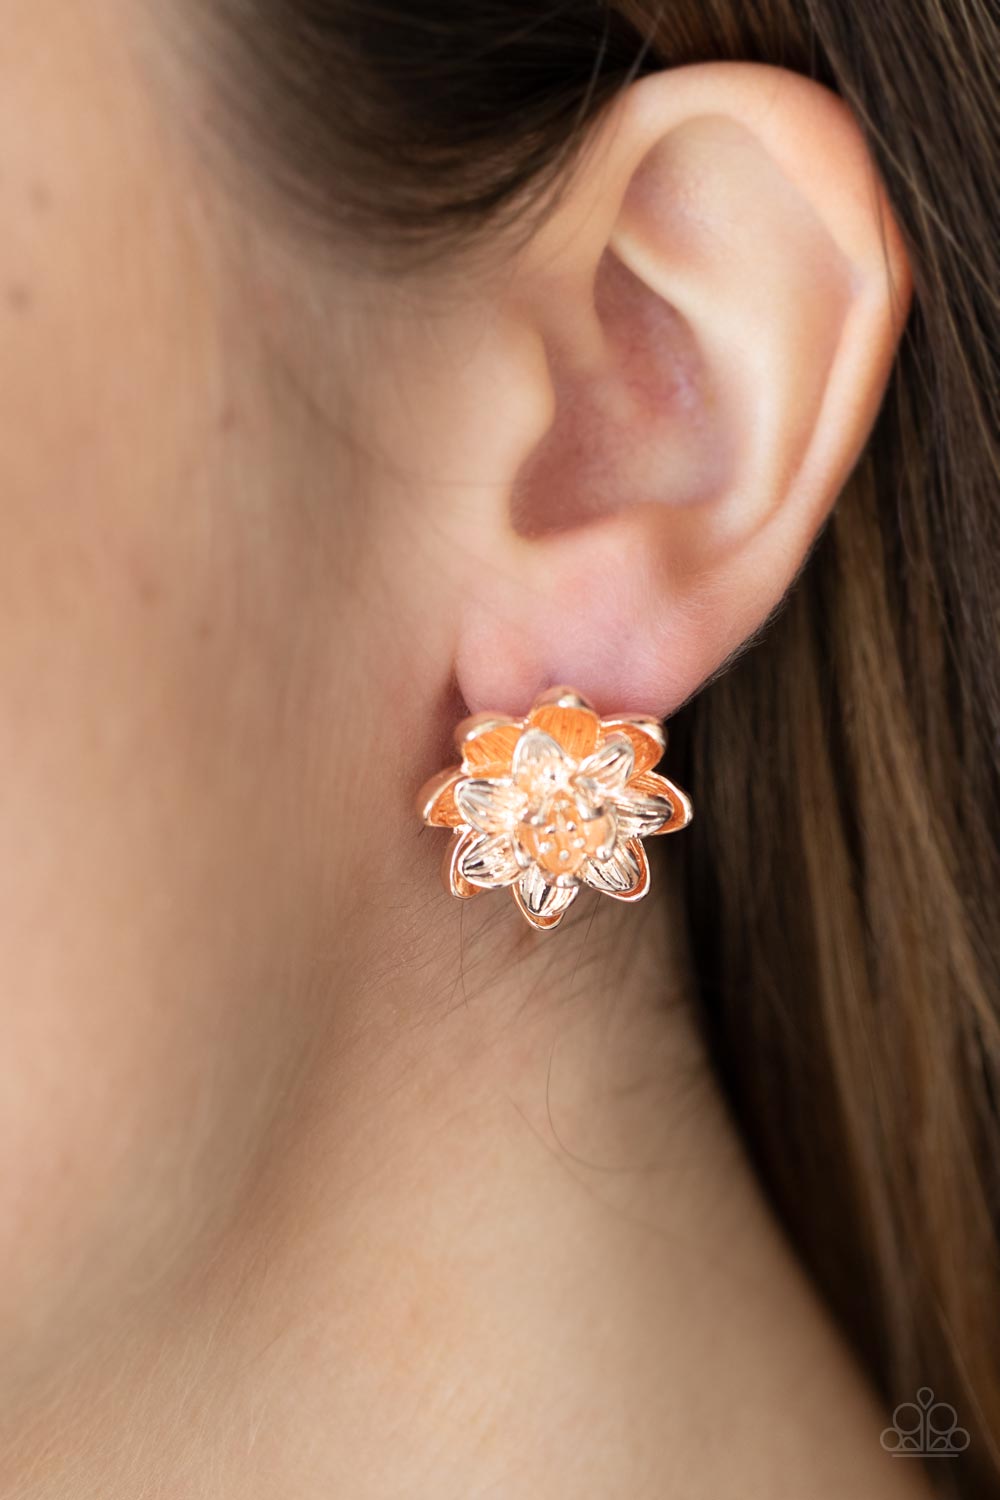 Water Lily Love - rose gold - Paparazzi earrings